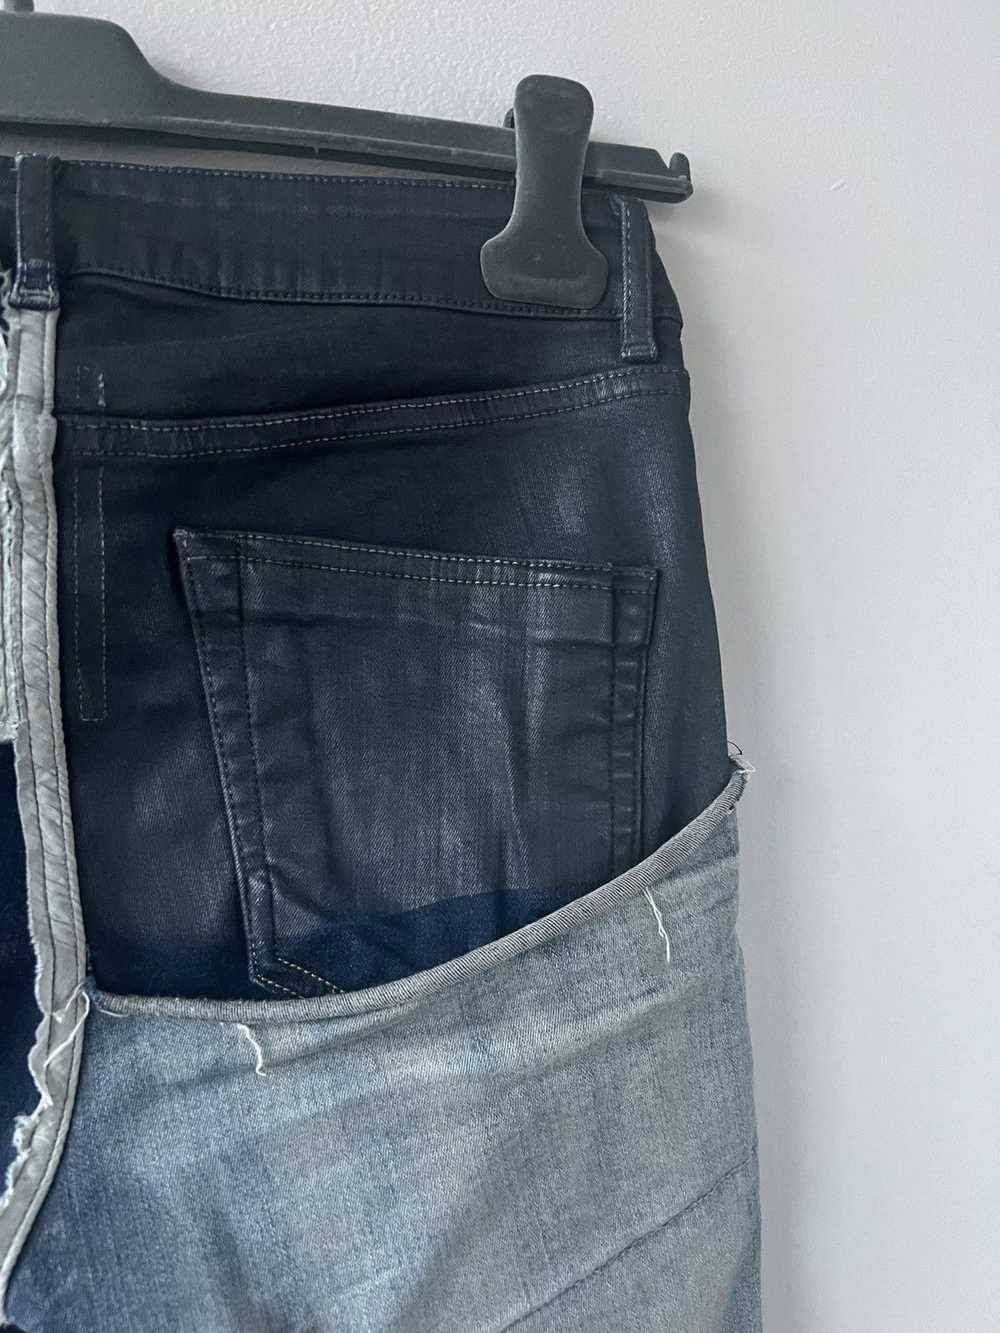 Rick Owens SS19 BABEL Combo Tyrone Jeans - image 7